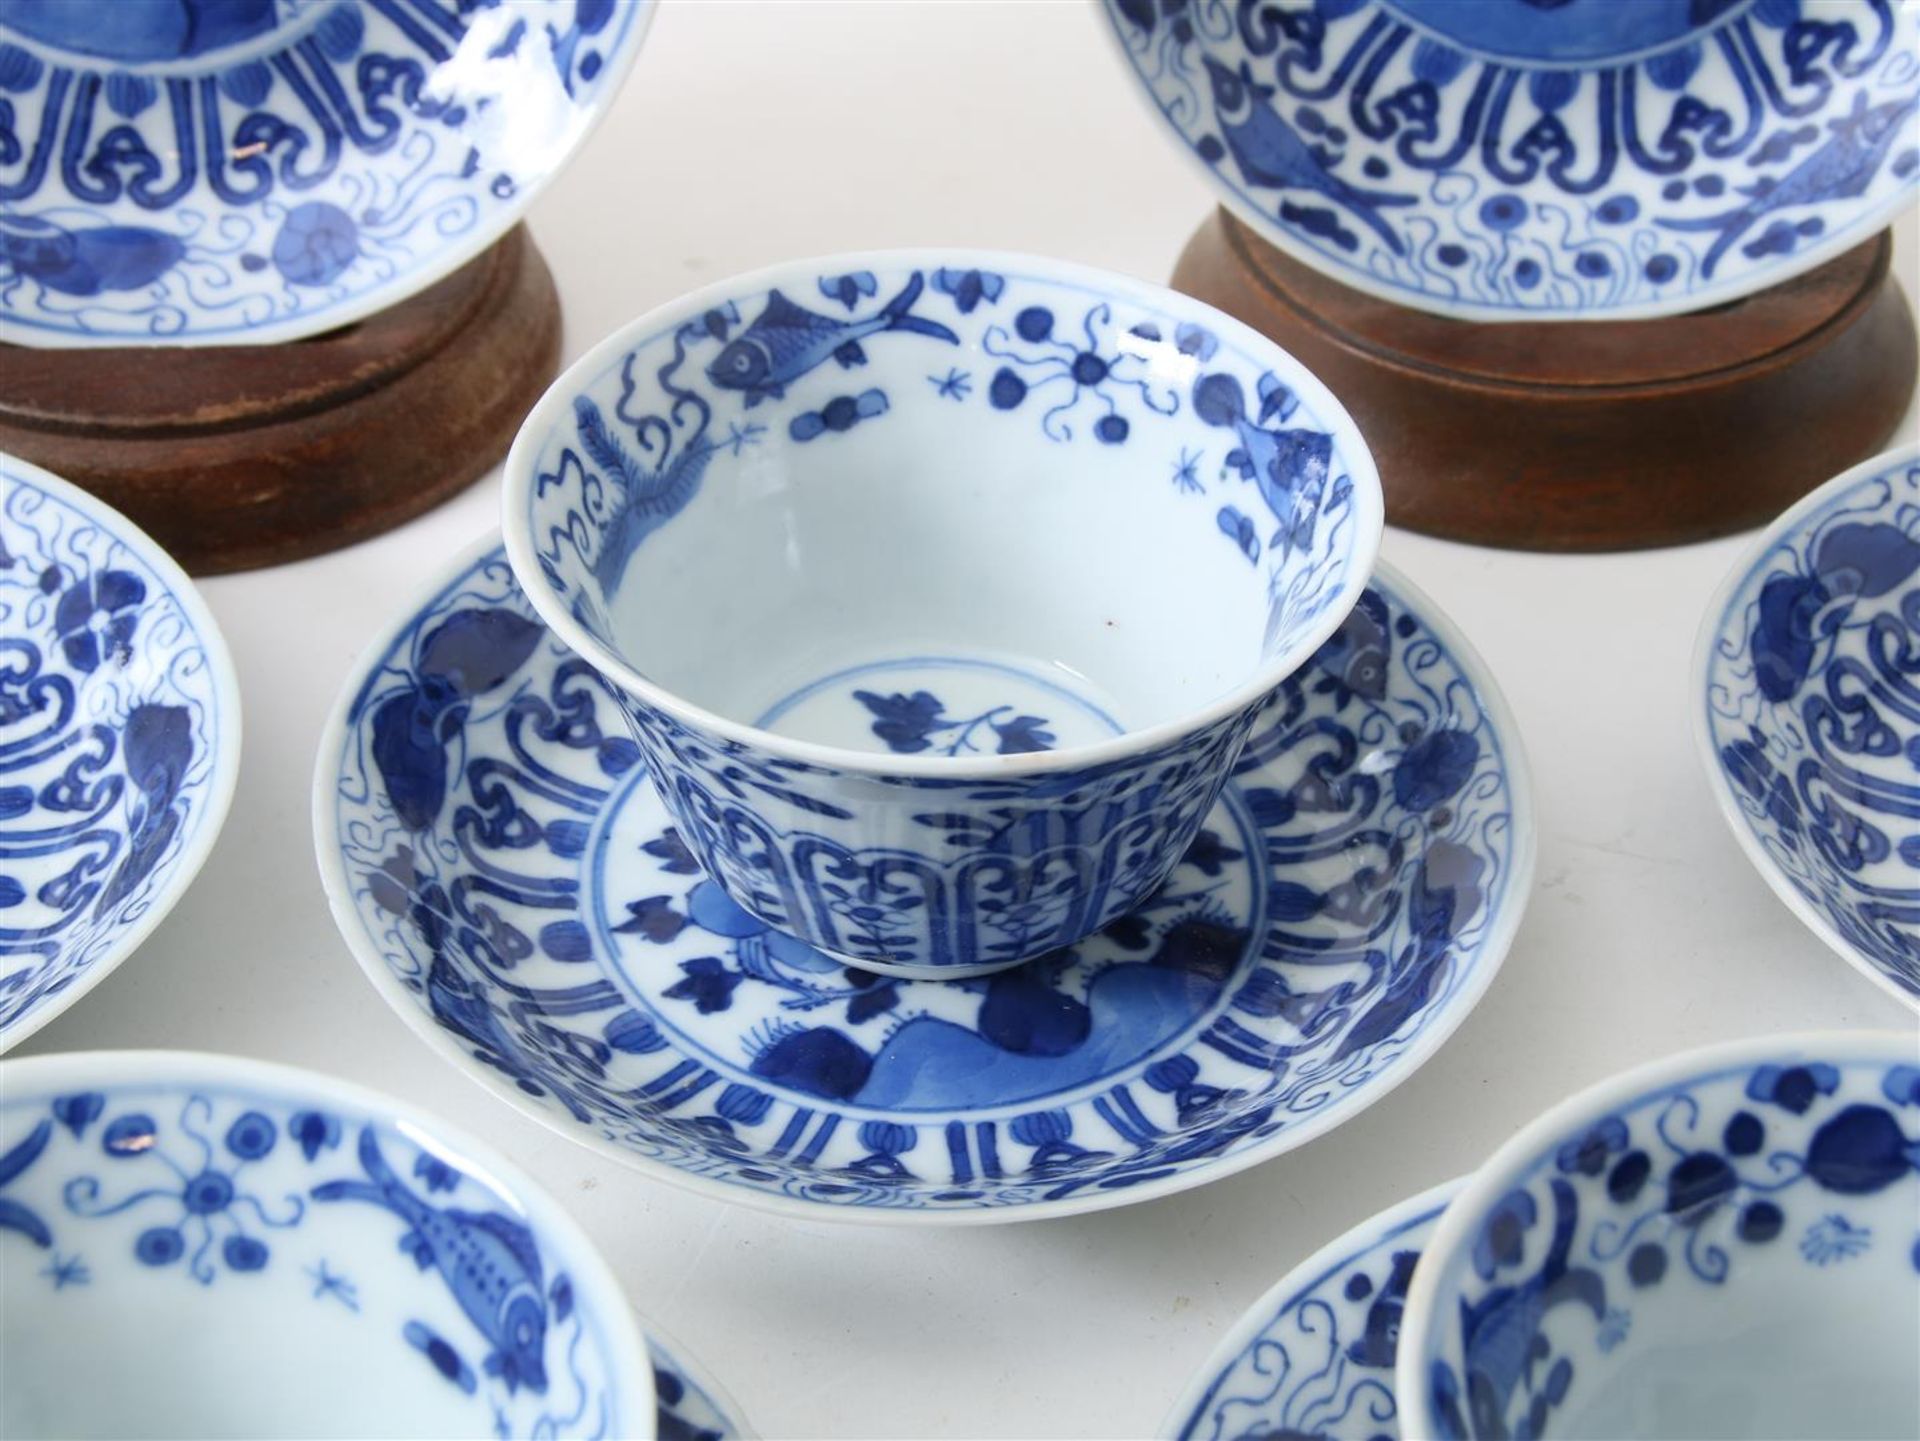 Lot of 12 porcelain cups and 11 saucers decorated in blue with perch and butterfly decor, China - Image 10 of 19